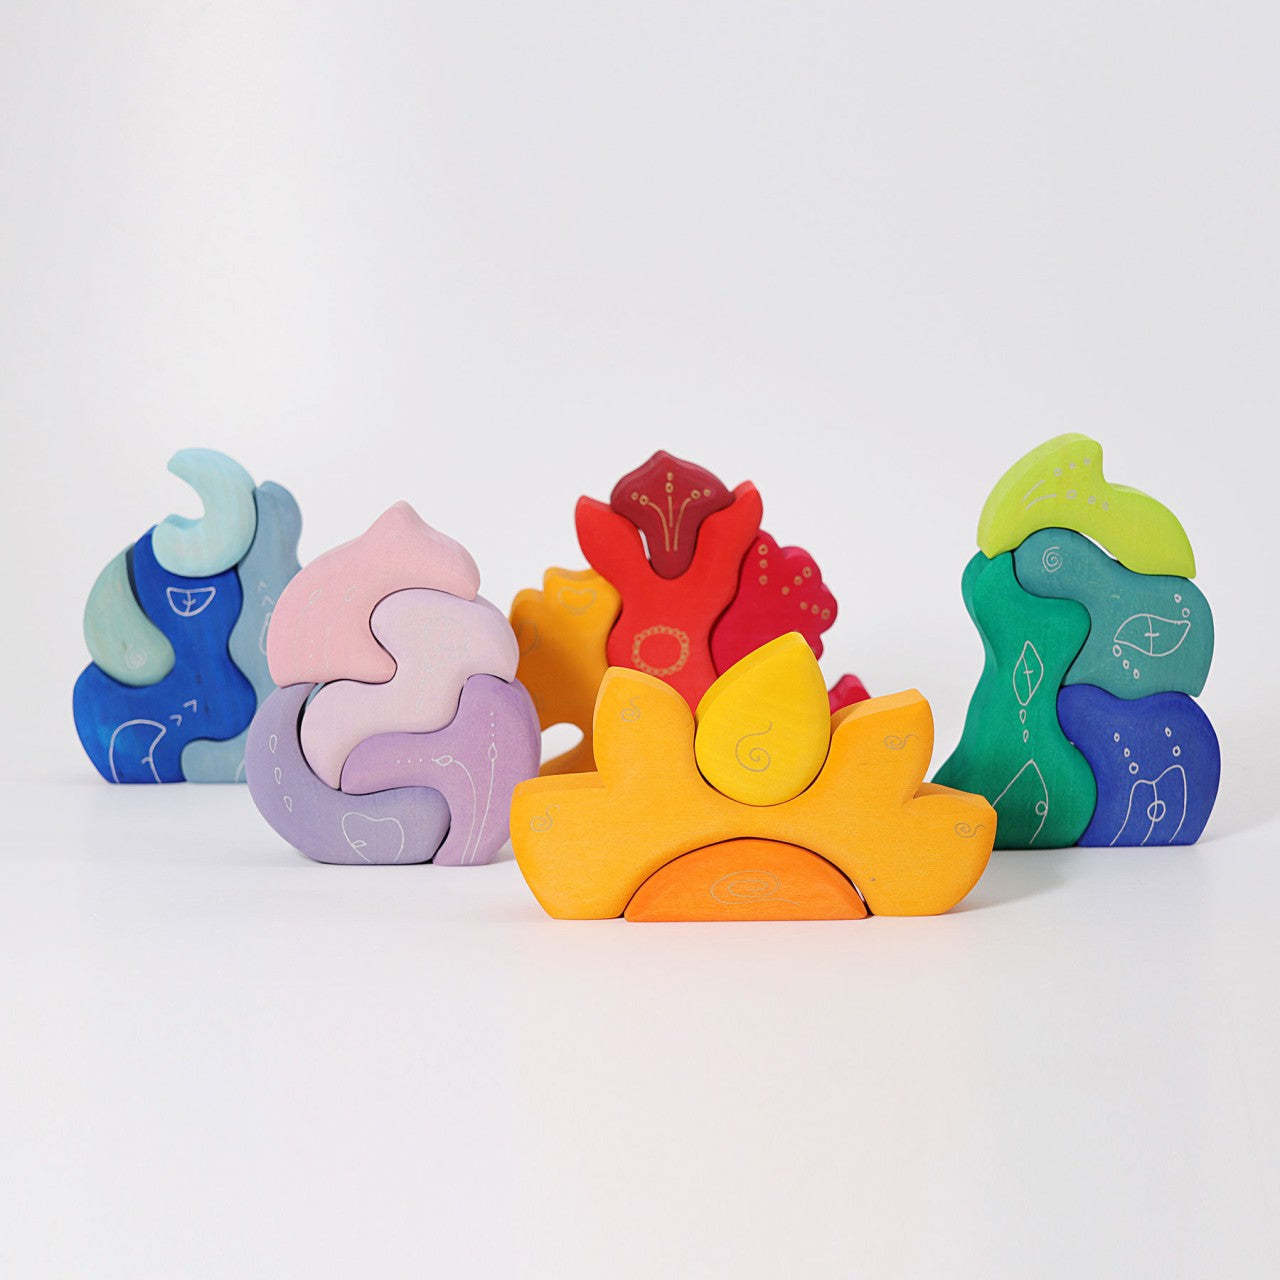 Casa Glora | 4 Pieces | Wooden Toys for Kids | Open-Ended Play